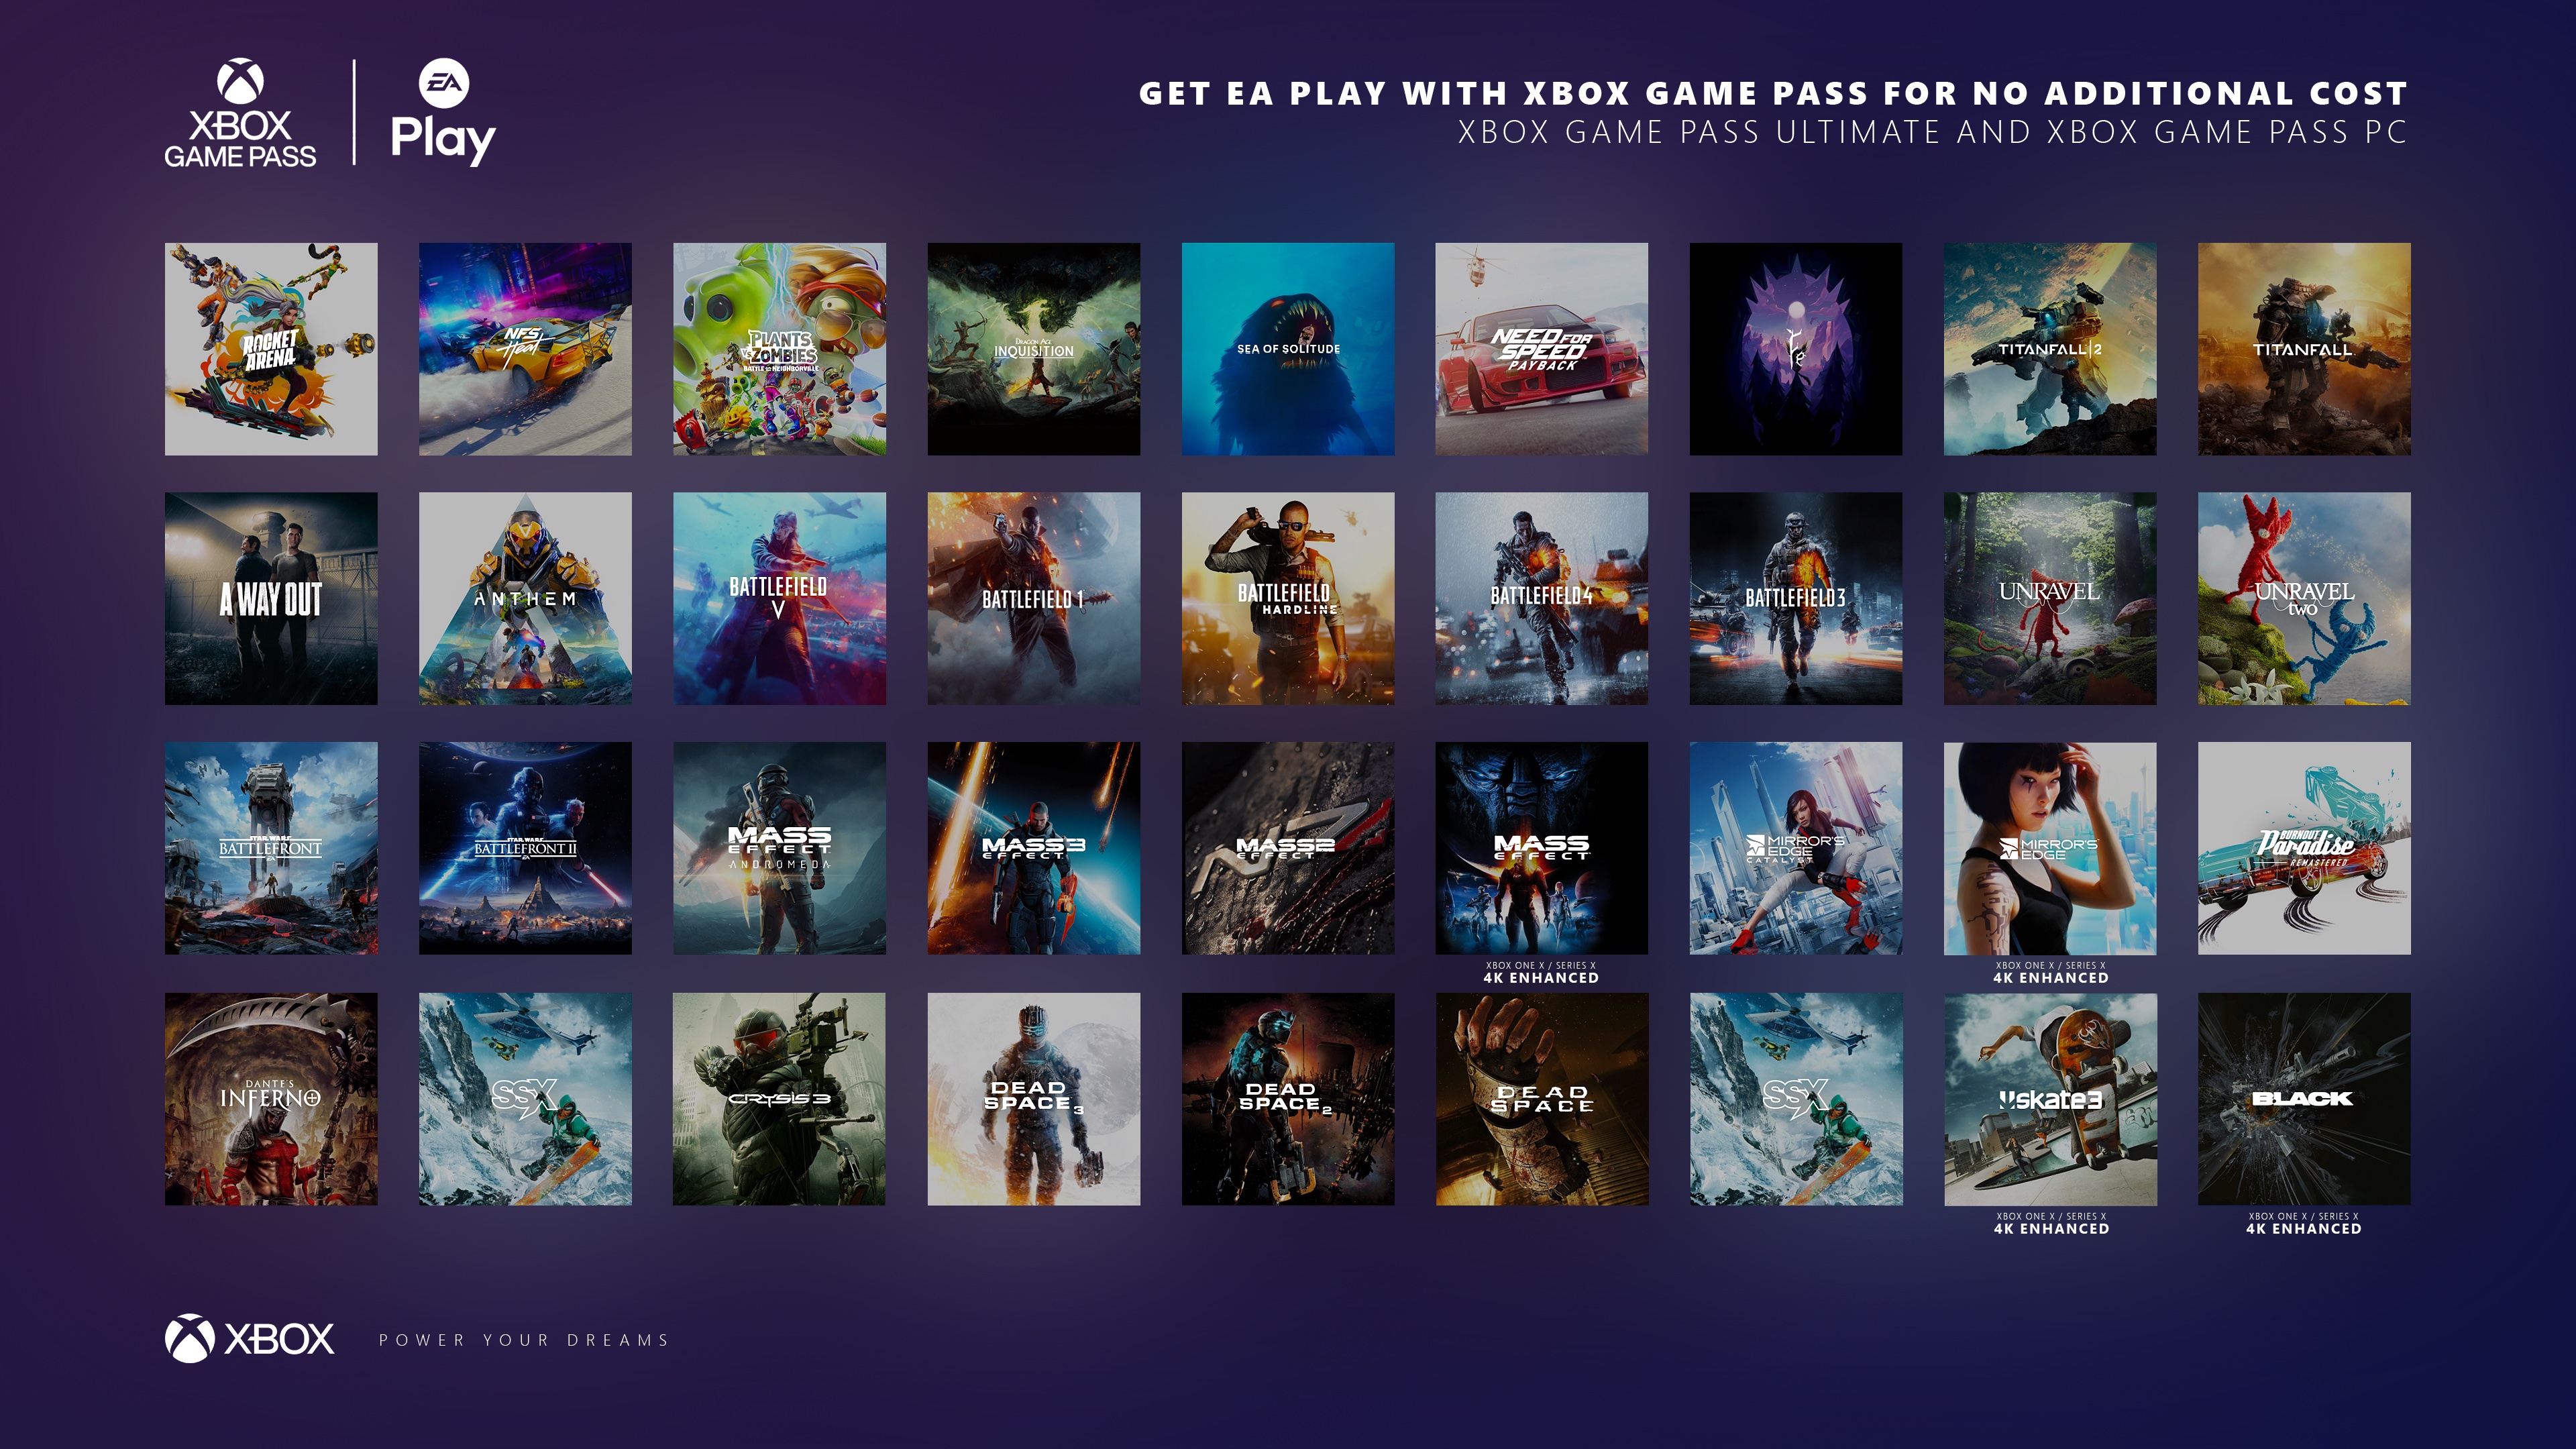 Klobrille on X: With EA Play joining Xbox Game Pass at no additional cost,  10+ Million Game Pass members get instant access to a wide variety of AAA  experiences by EA next